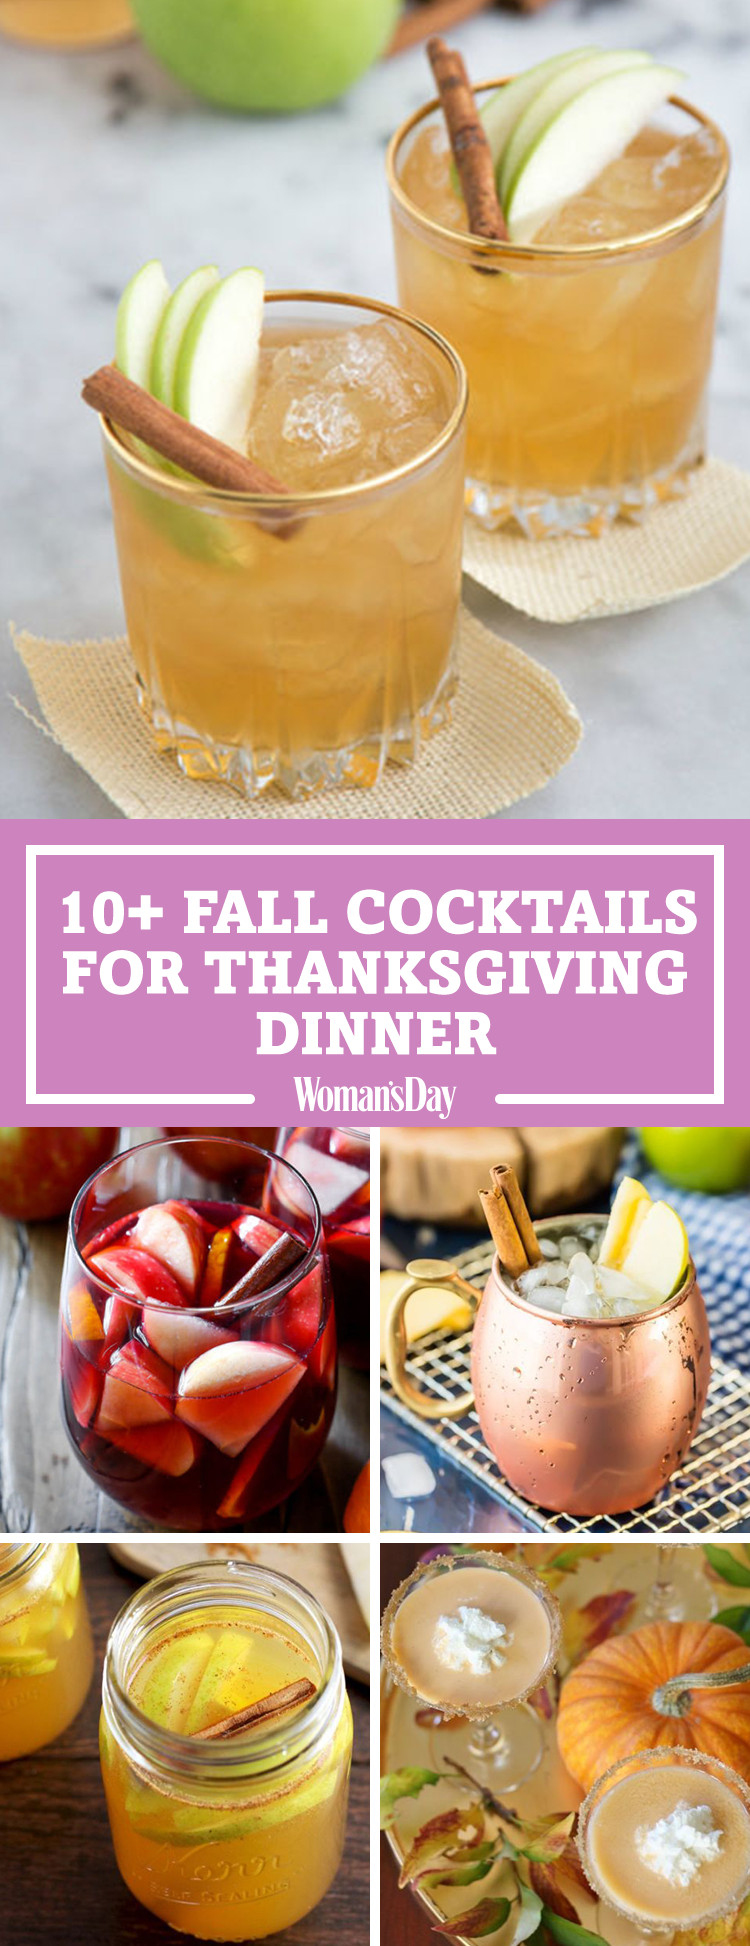 Drinks For Thanksgiving
 14 Best Fall Cocktails for Thanksgiving Recipes for Easy